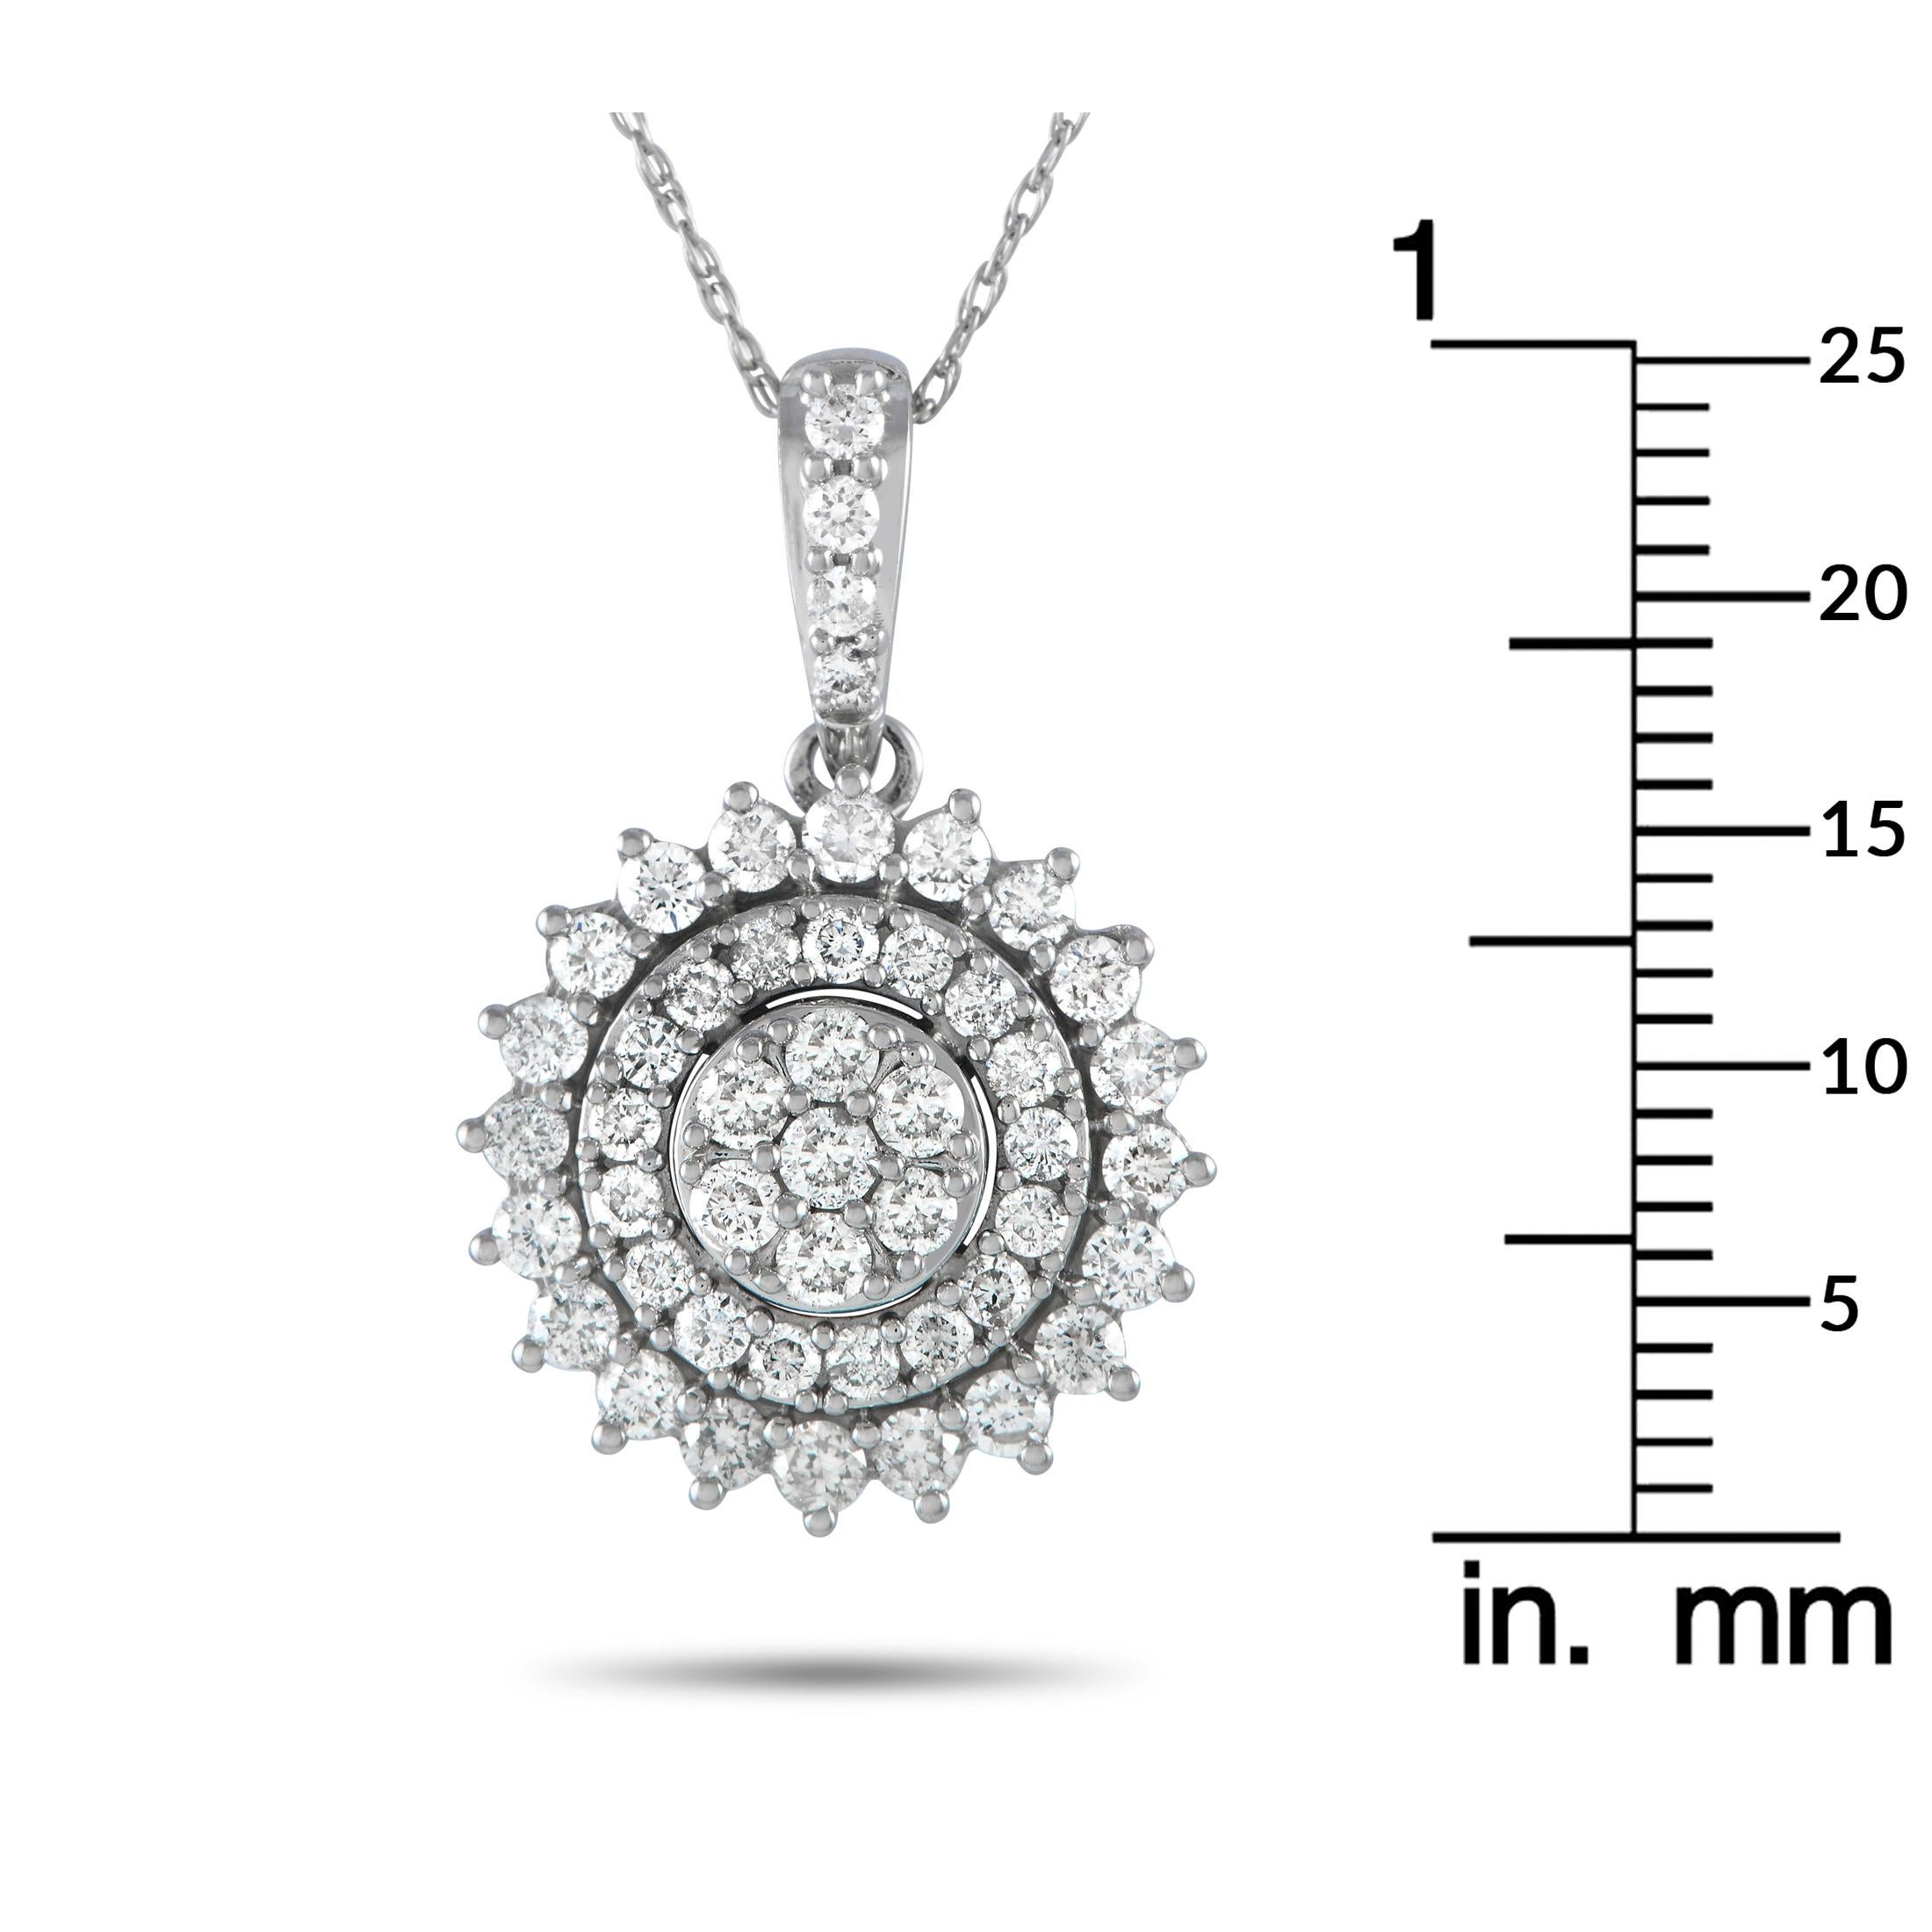 LB Exclusive 14K White Gold 1.0ct Diamond Pendant Necklace PN15057 In New Condition For Sale In Southampton, PA